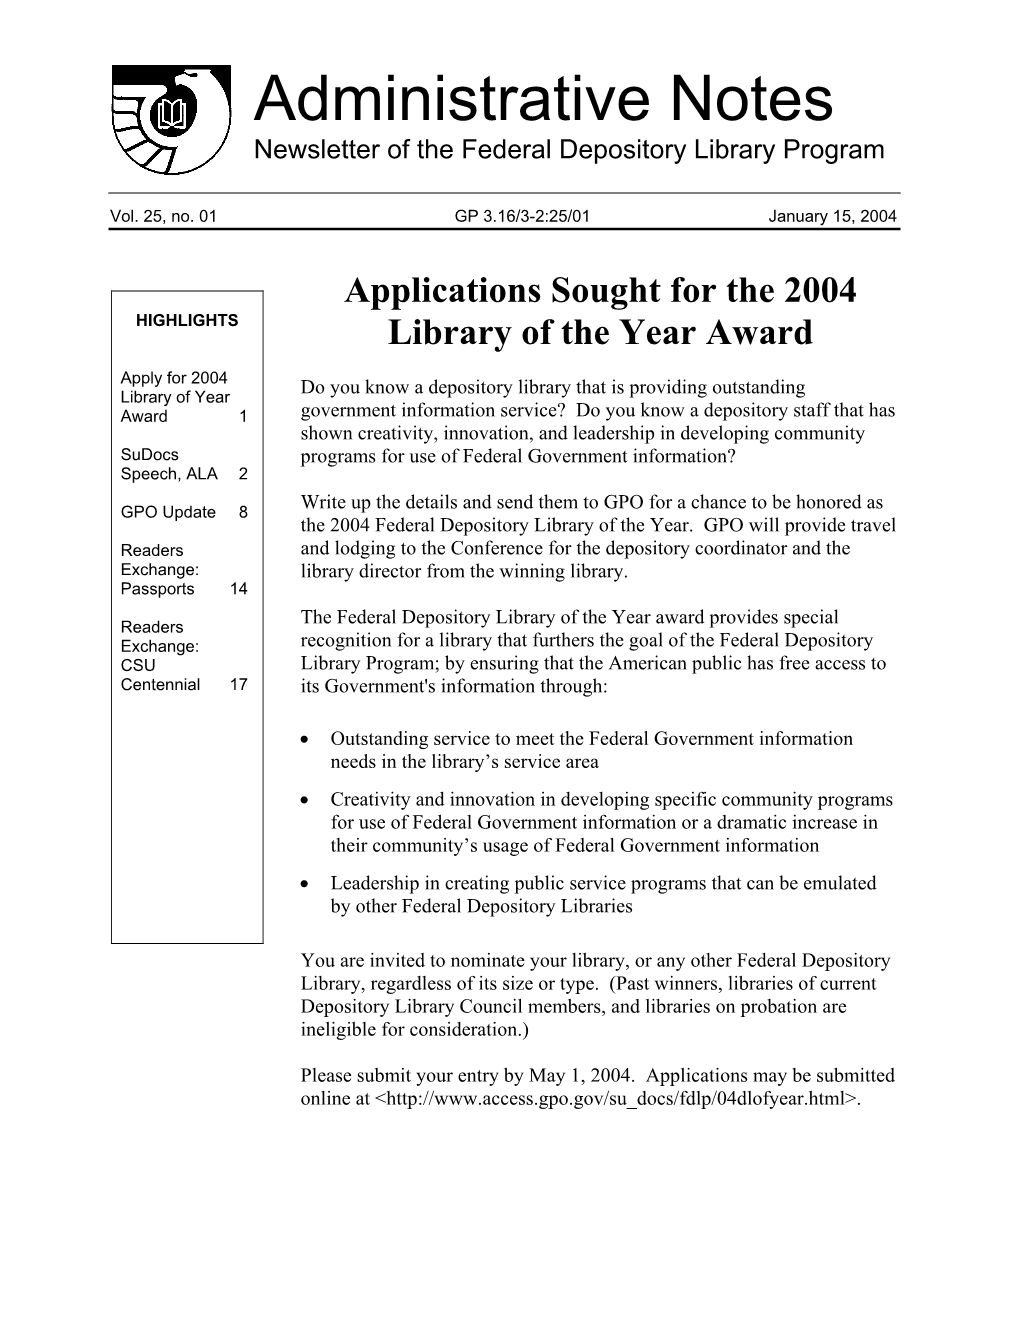 Administrative Notes Newsletter of the Federal Depository Library Program